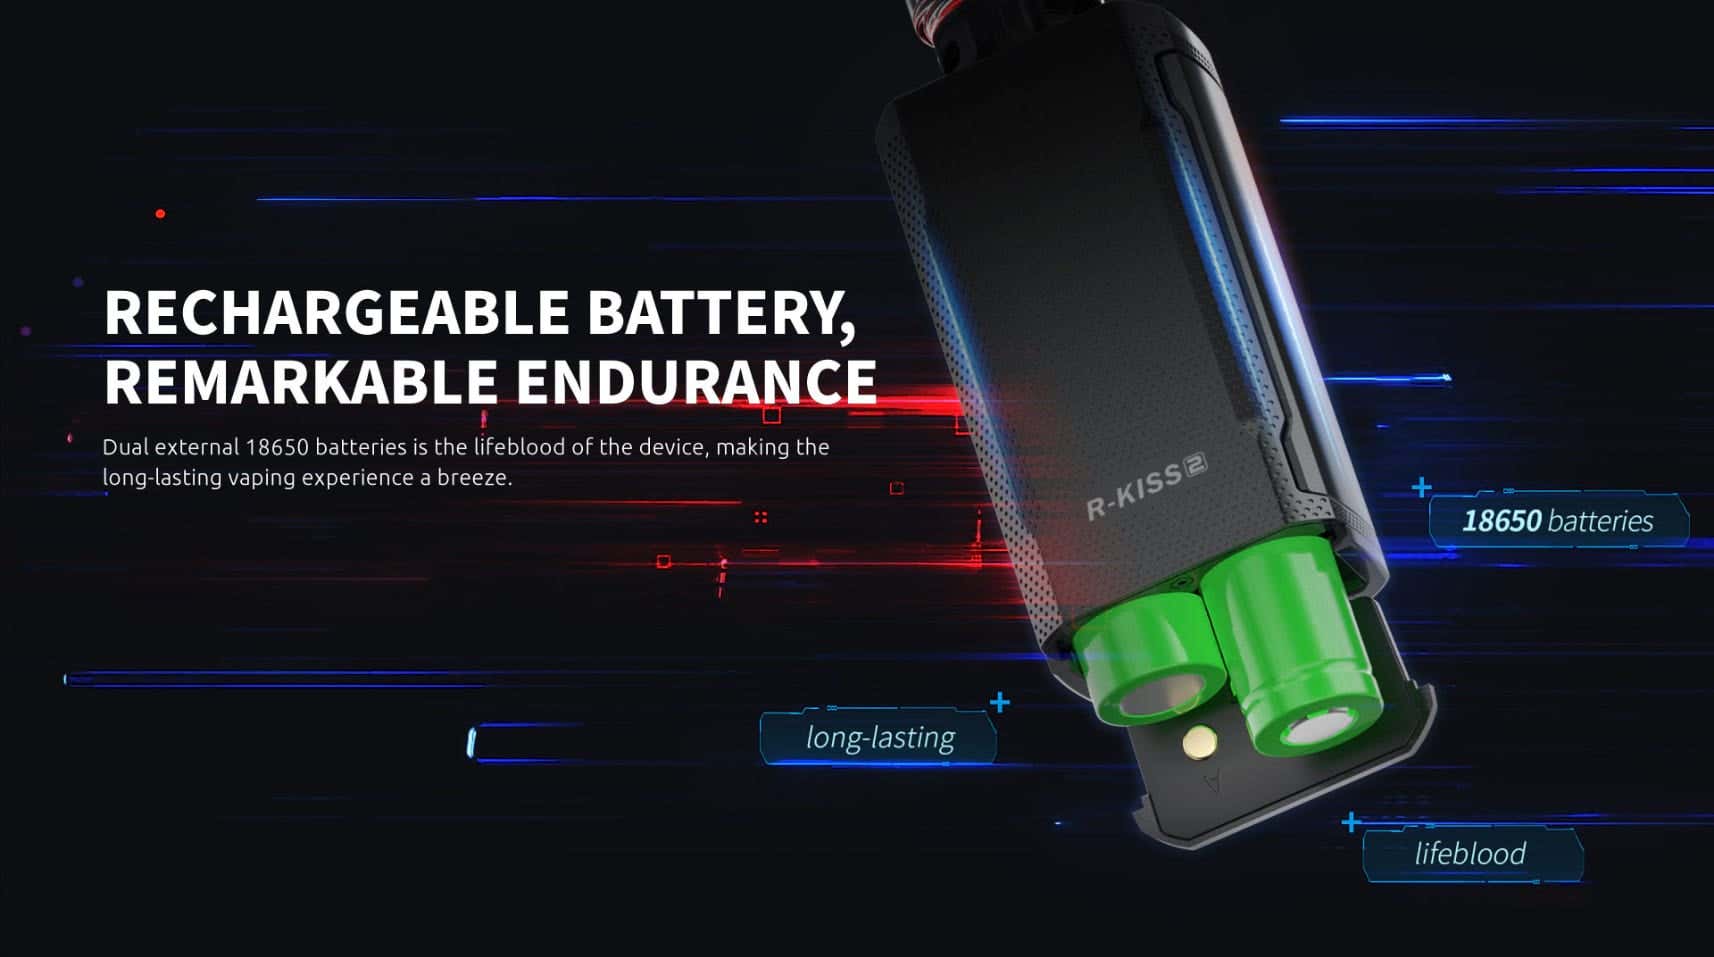 Powered by dual 18650 battery cells, ensuring a long-lasting experience.